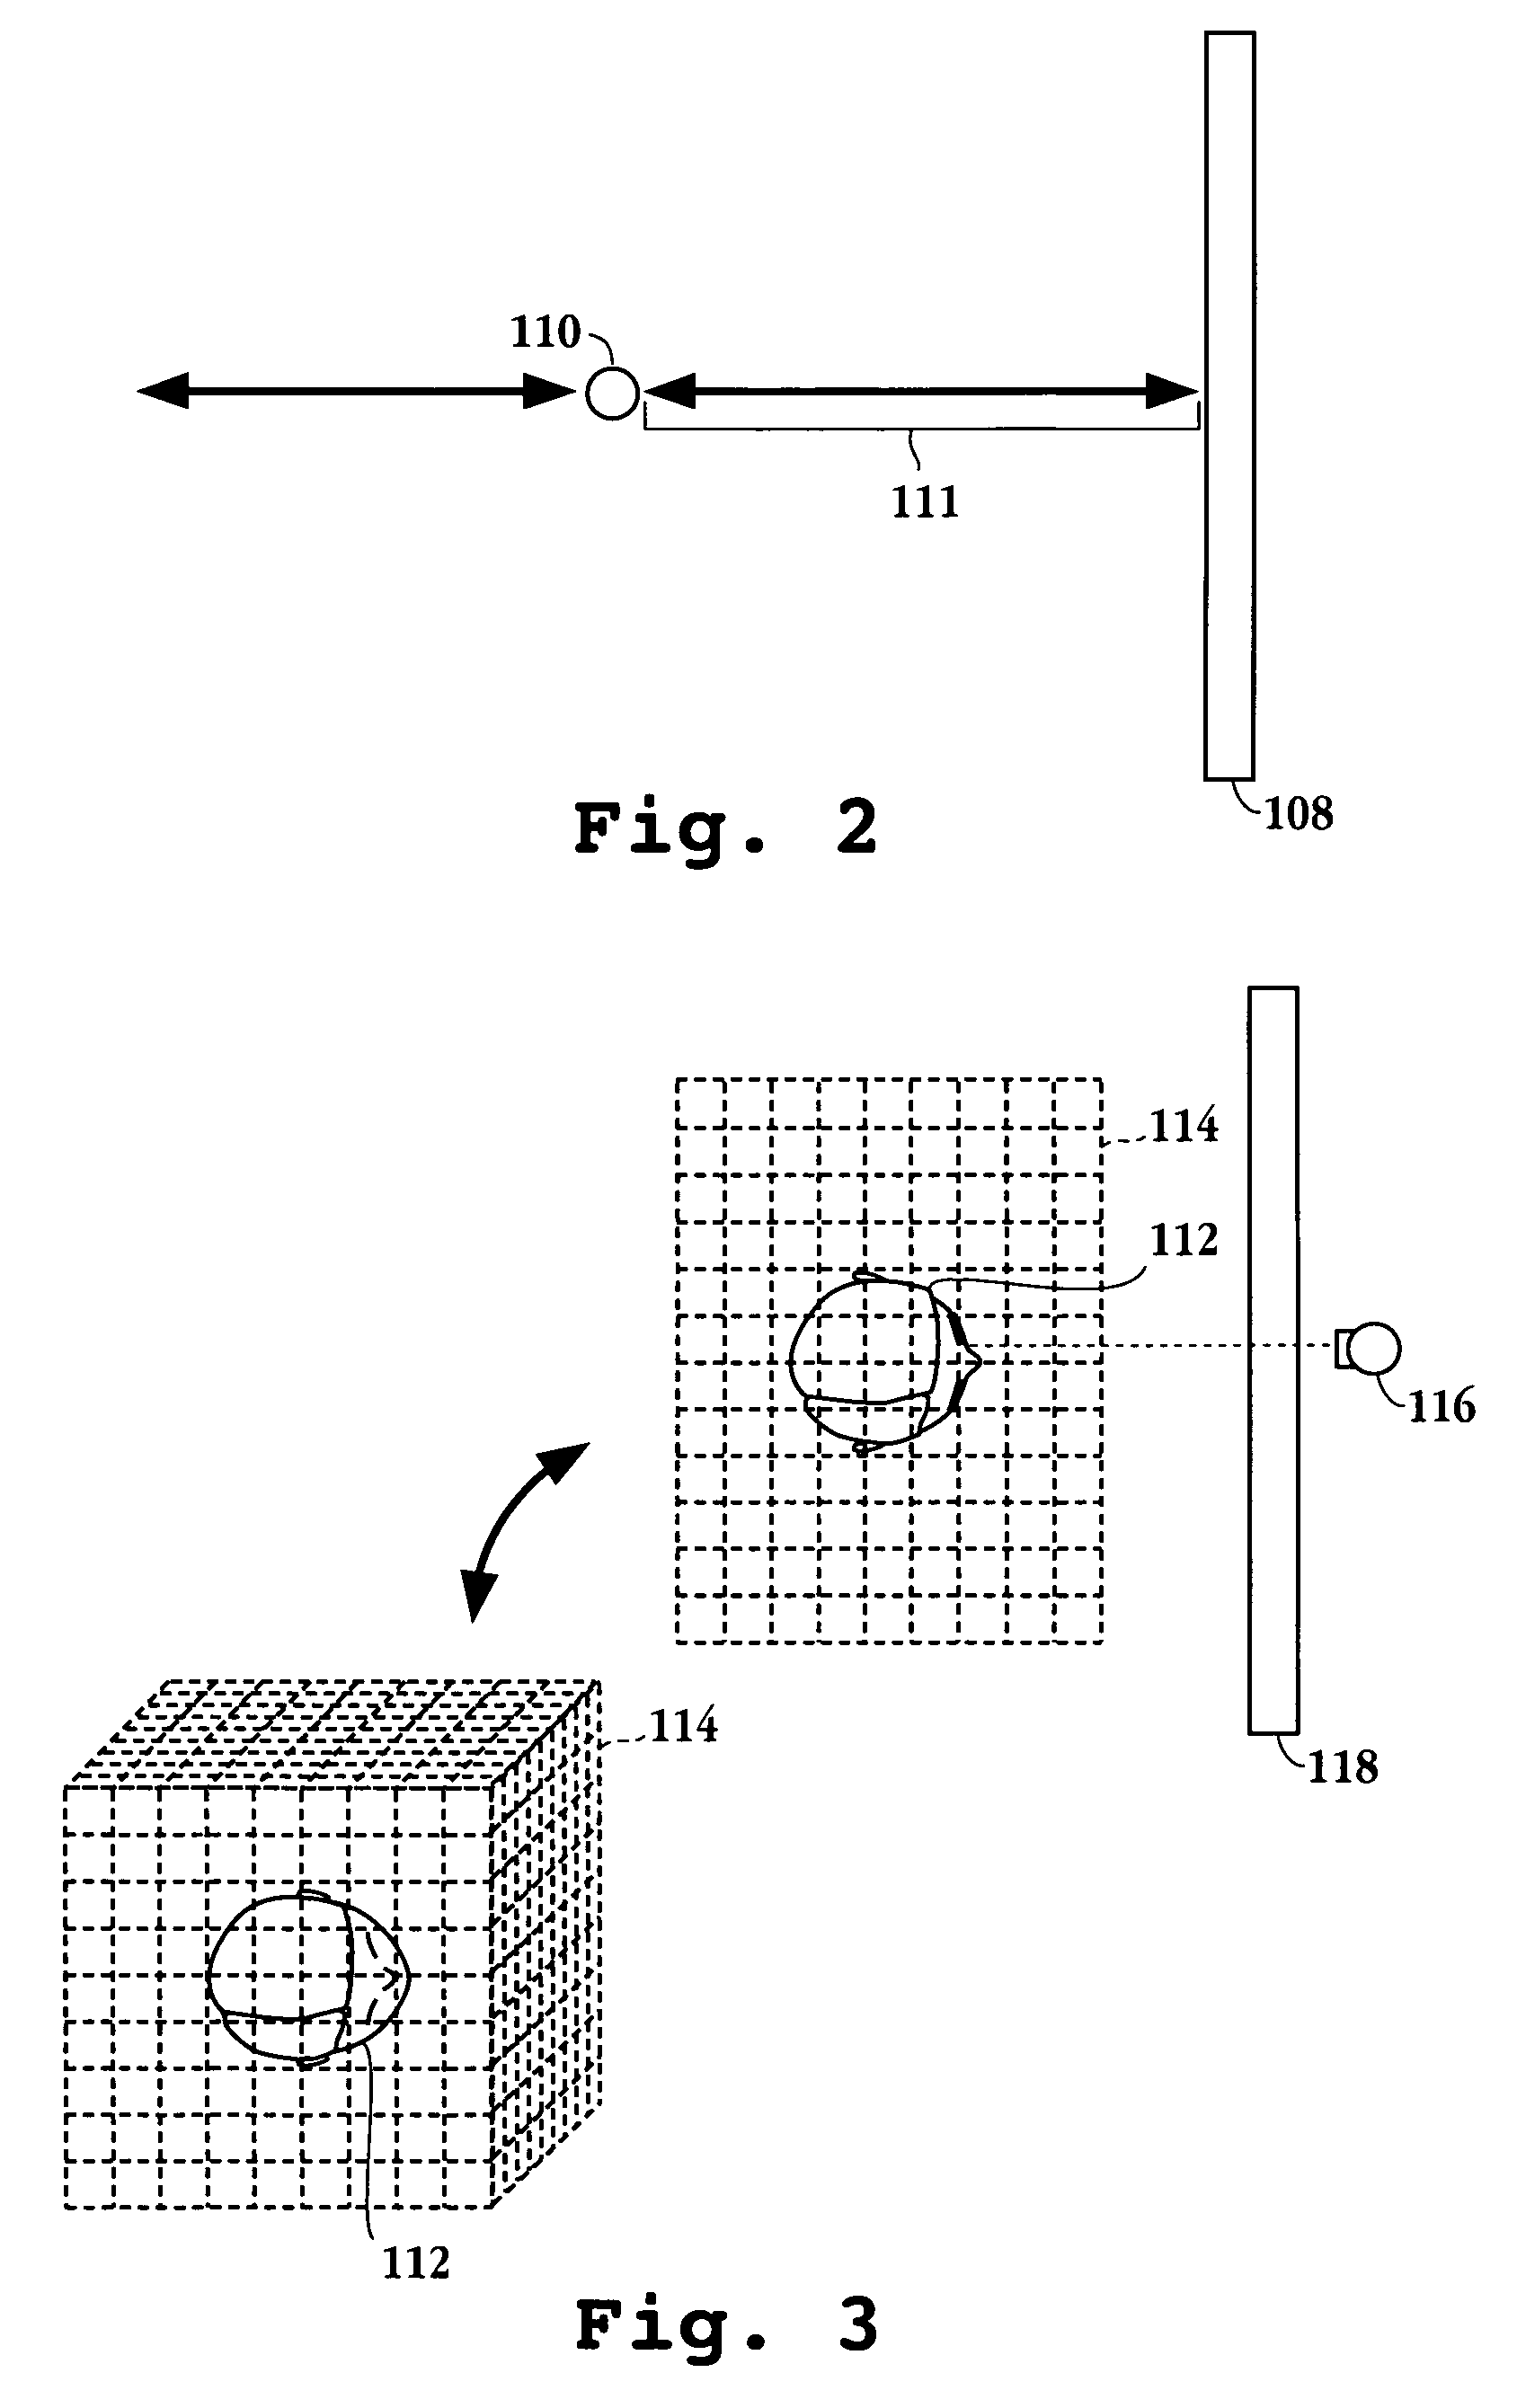 Method and apparatus for adjusting a view of a scene being displayed according to tracked head motion